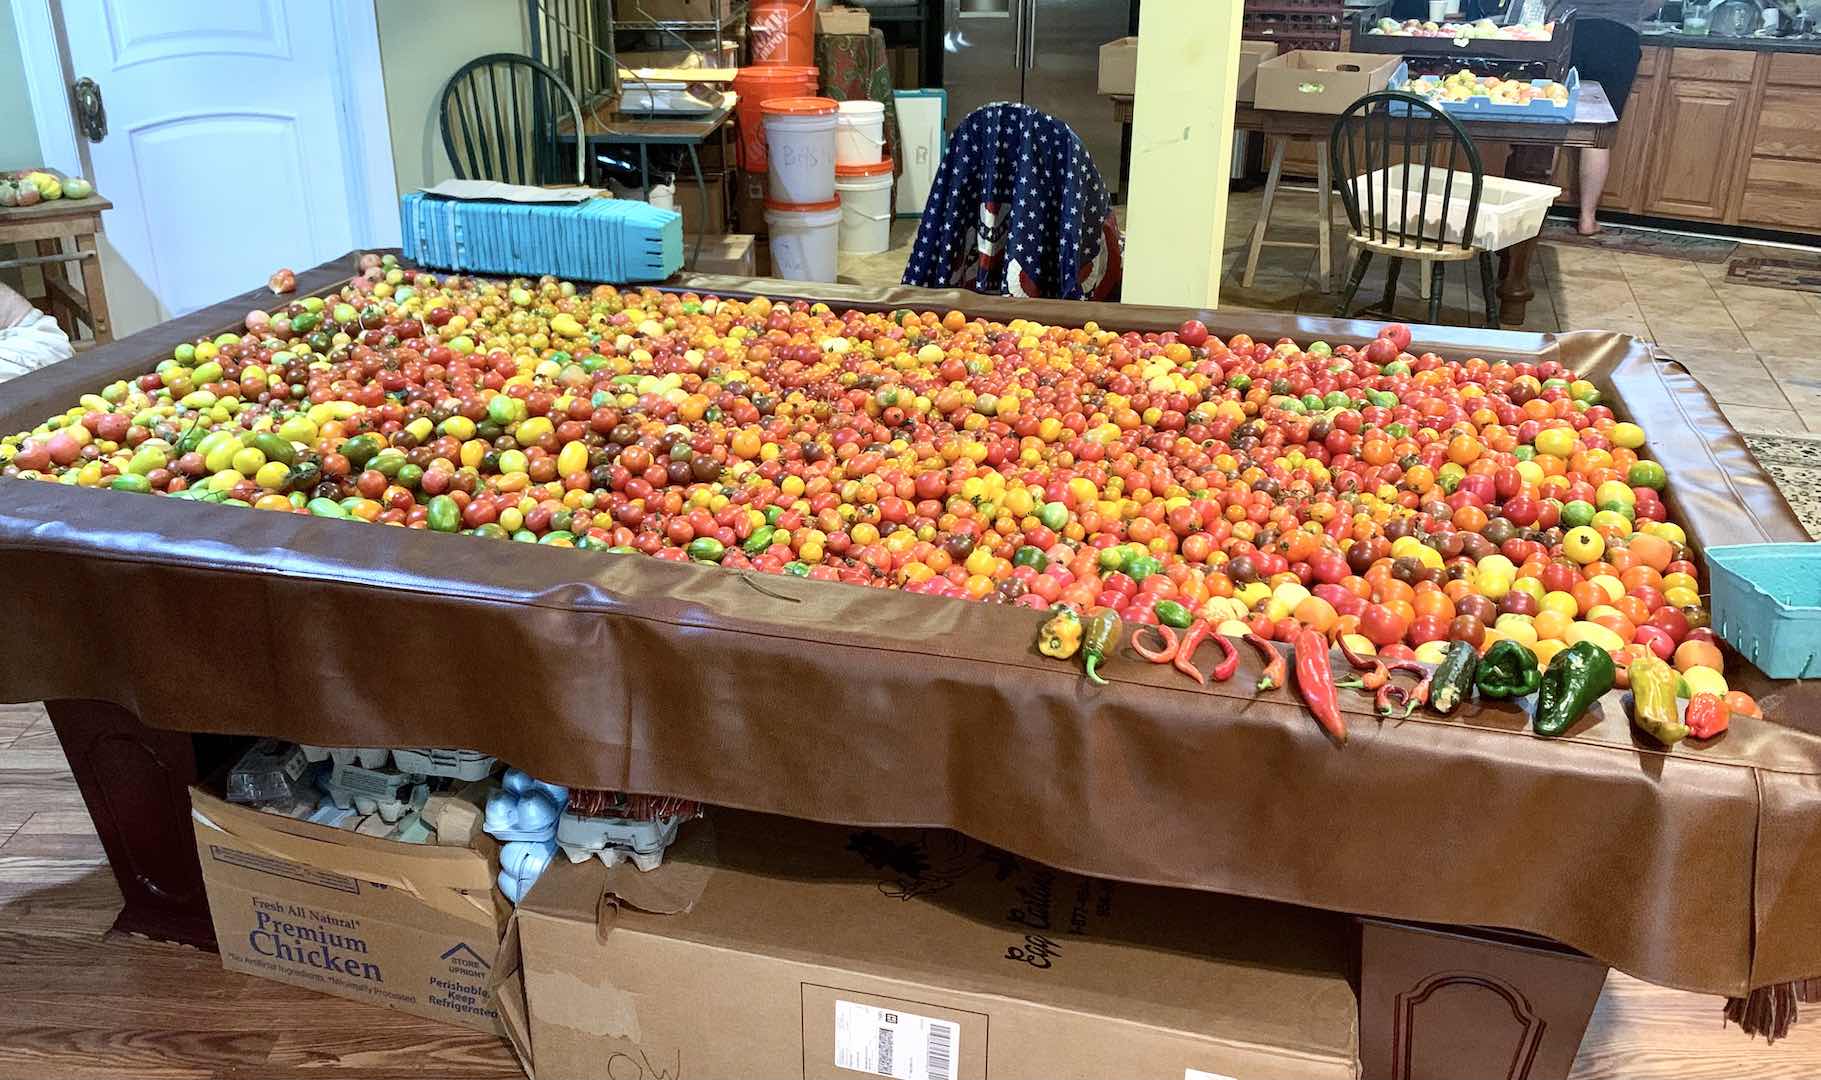 We visited during the tomato harvest which took over the pool table!